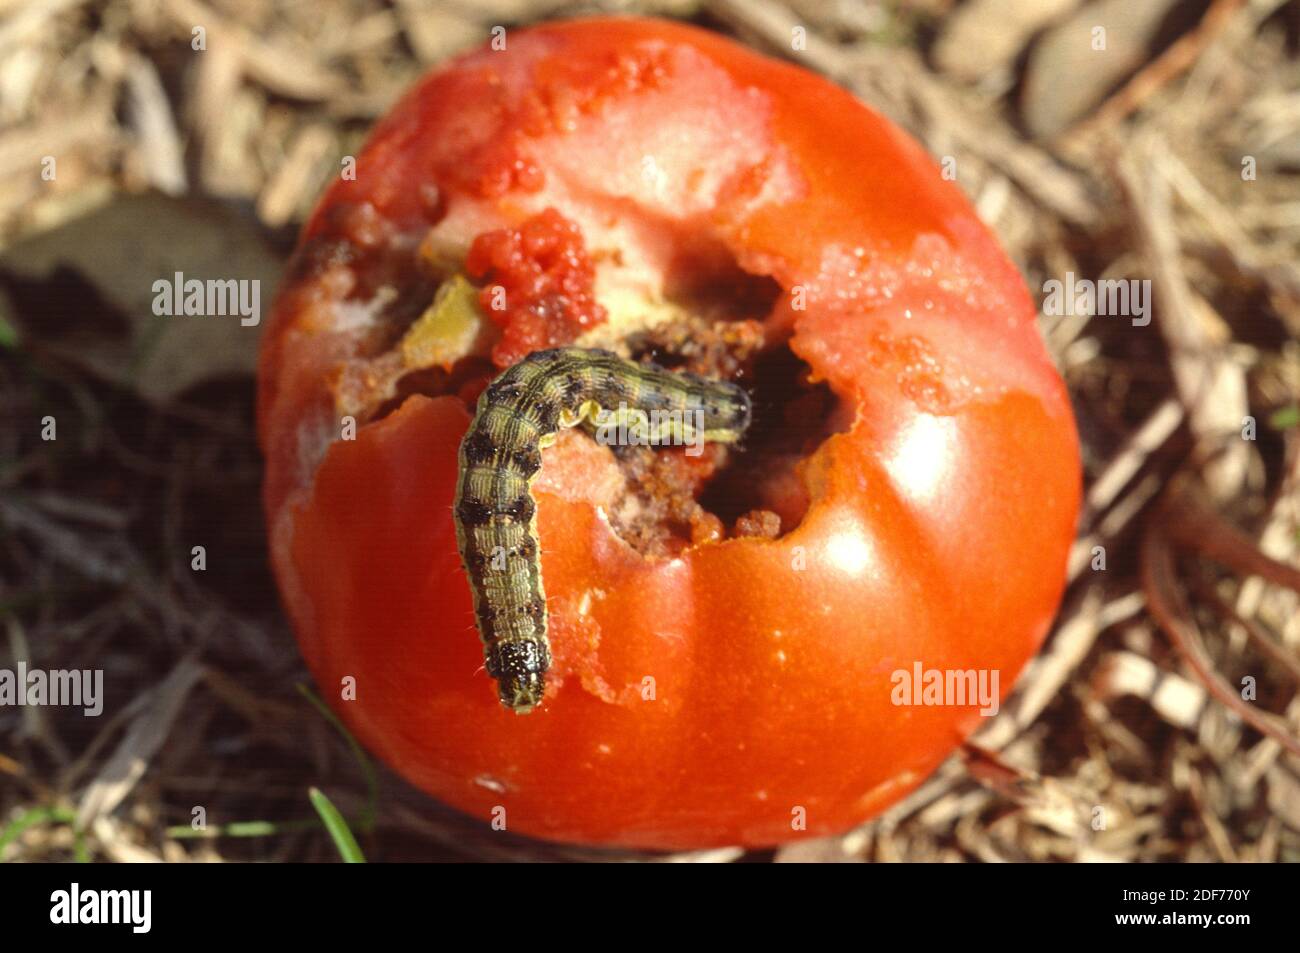 Corn earworm or tomato fruitworm (Helicoverpa armigera armigera) is a moth native to central and southern Europe, Africa and temperate Asia. Stock Photo